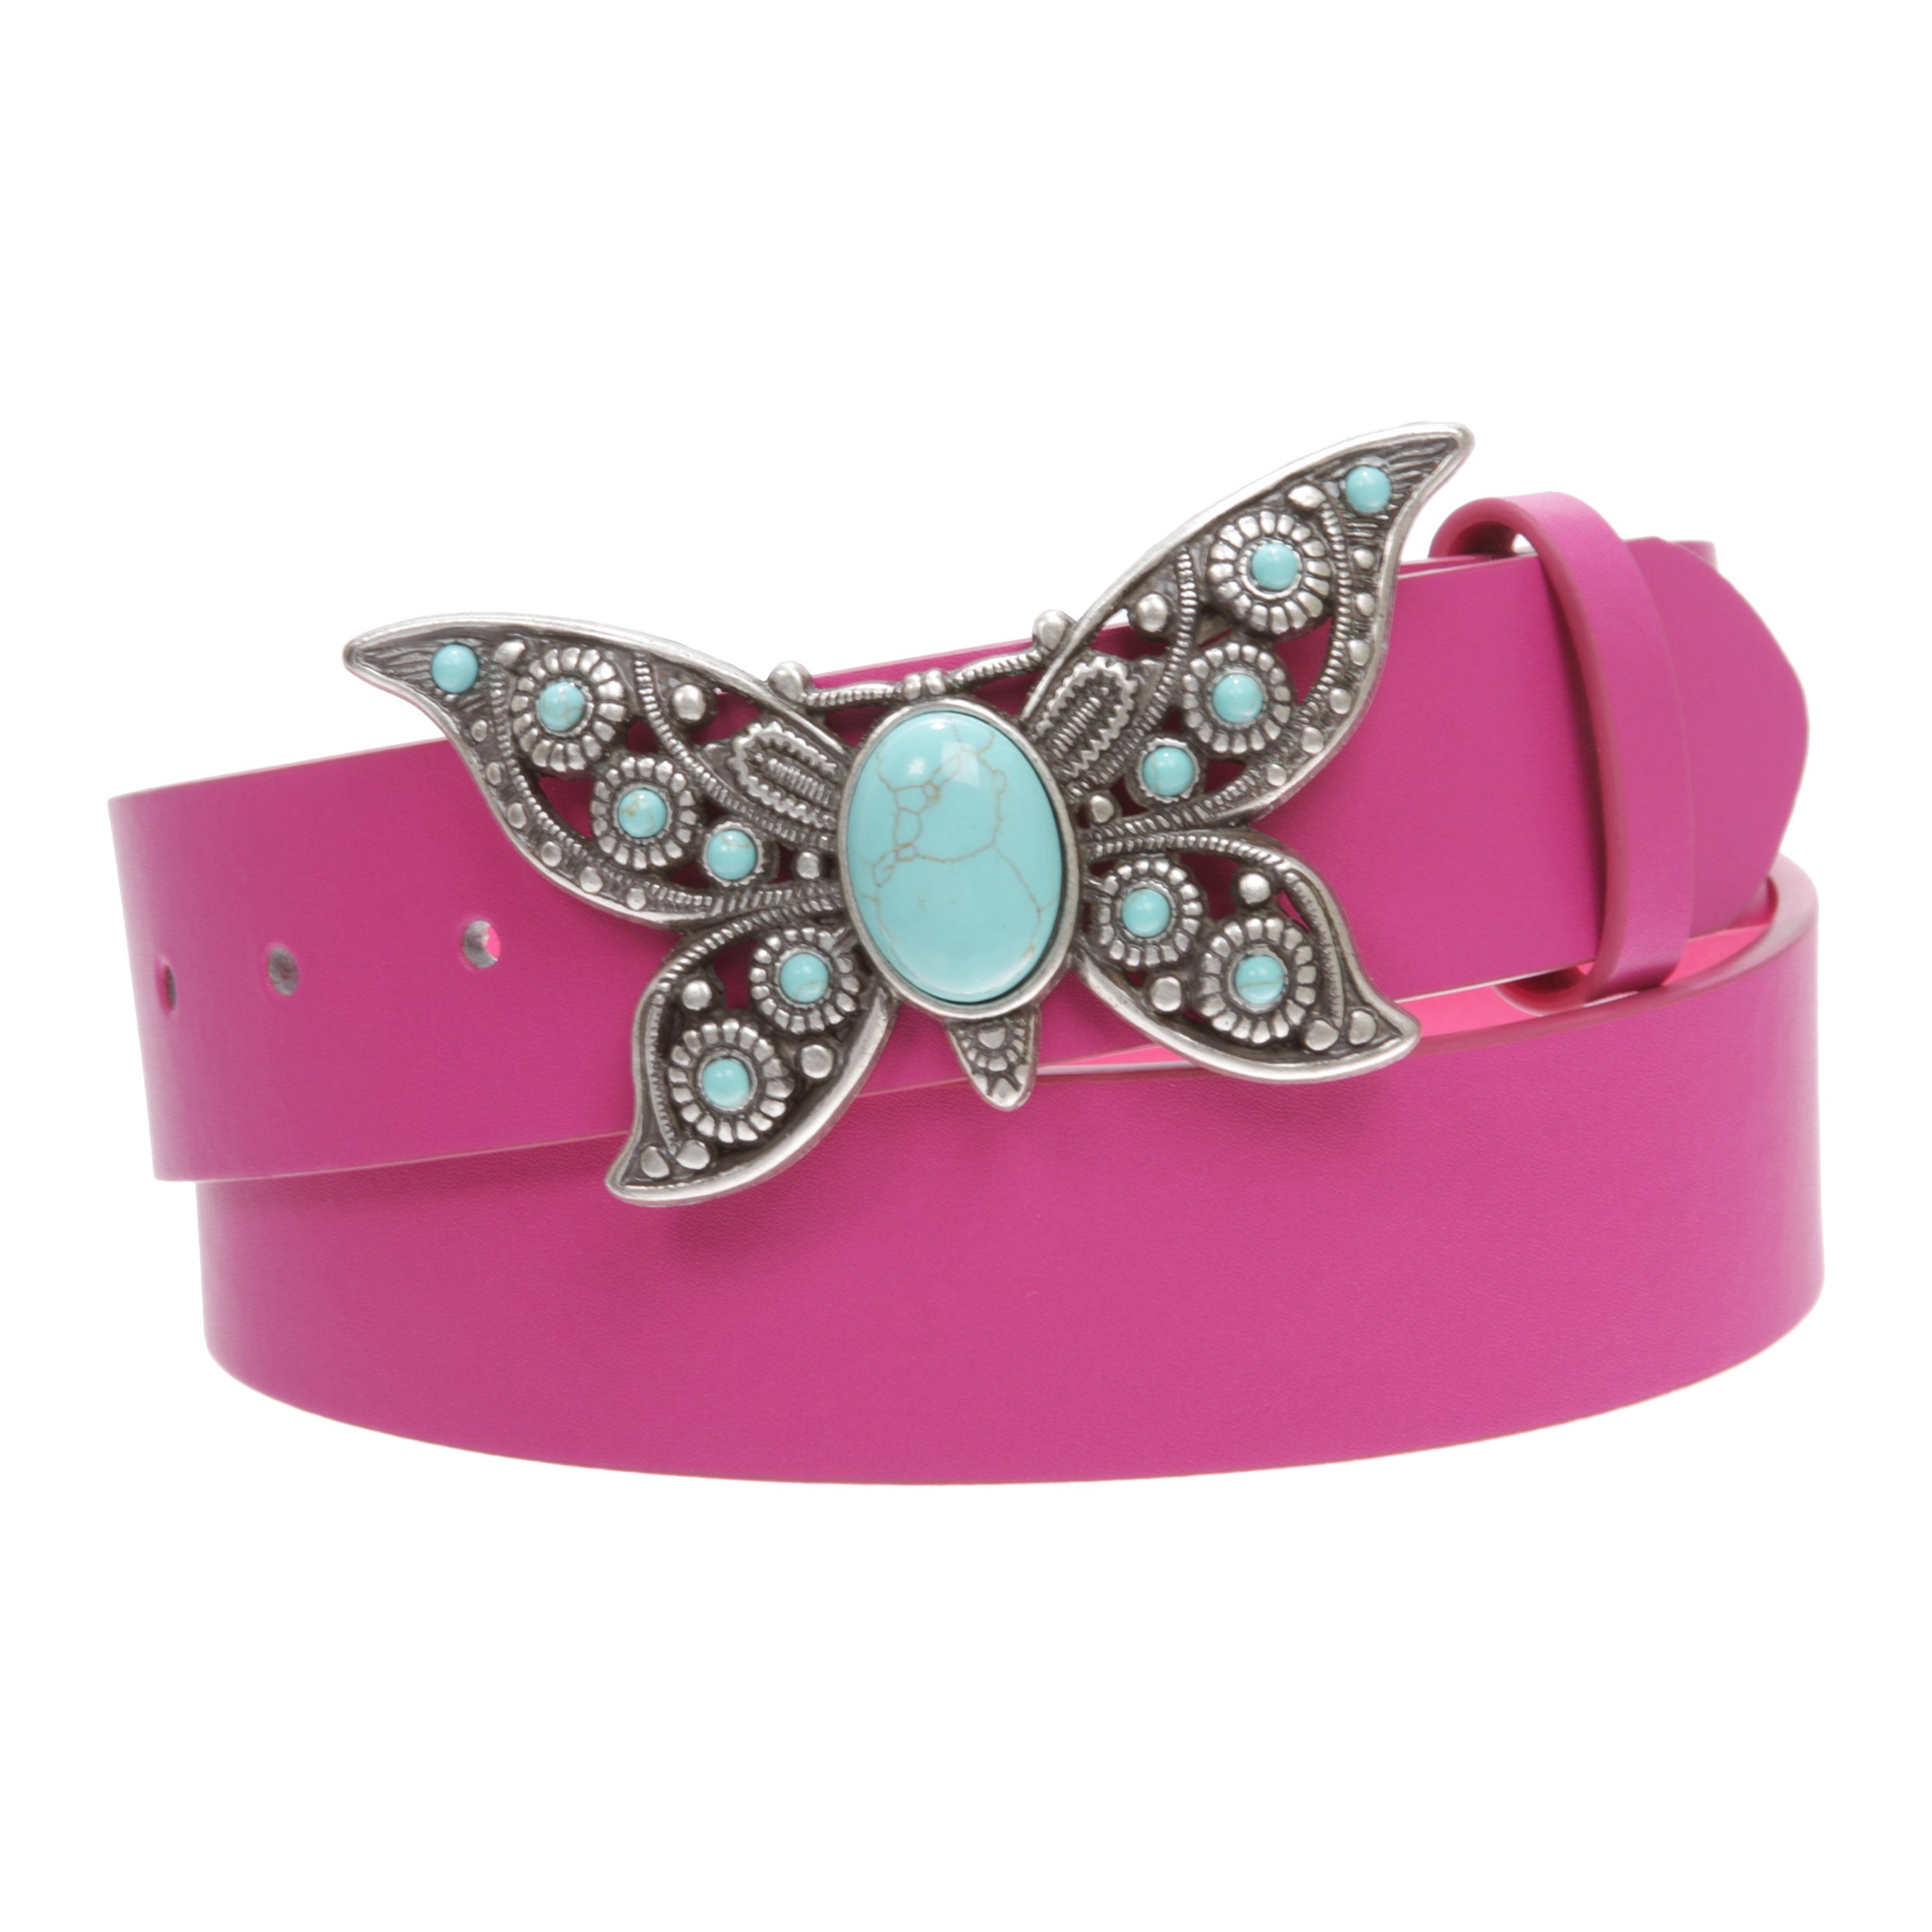 Women's Casual Jean Belt with Perforated Turquoise Stone Butterfly Belt Buckle